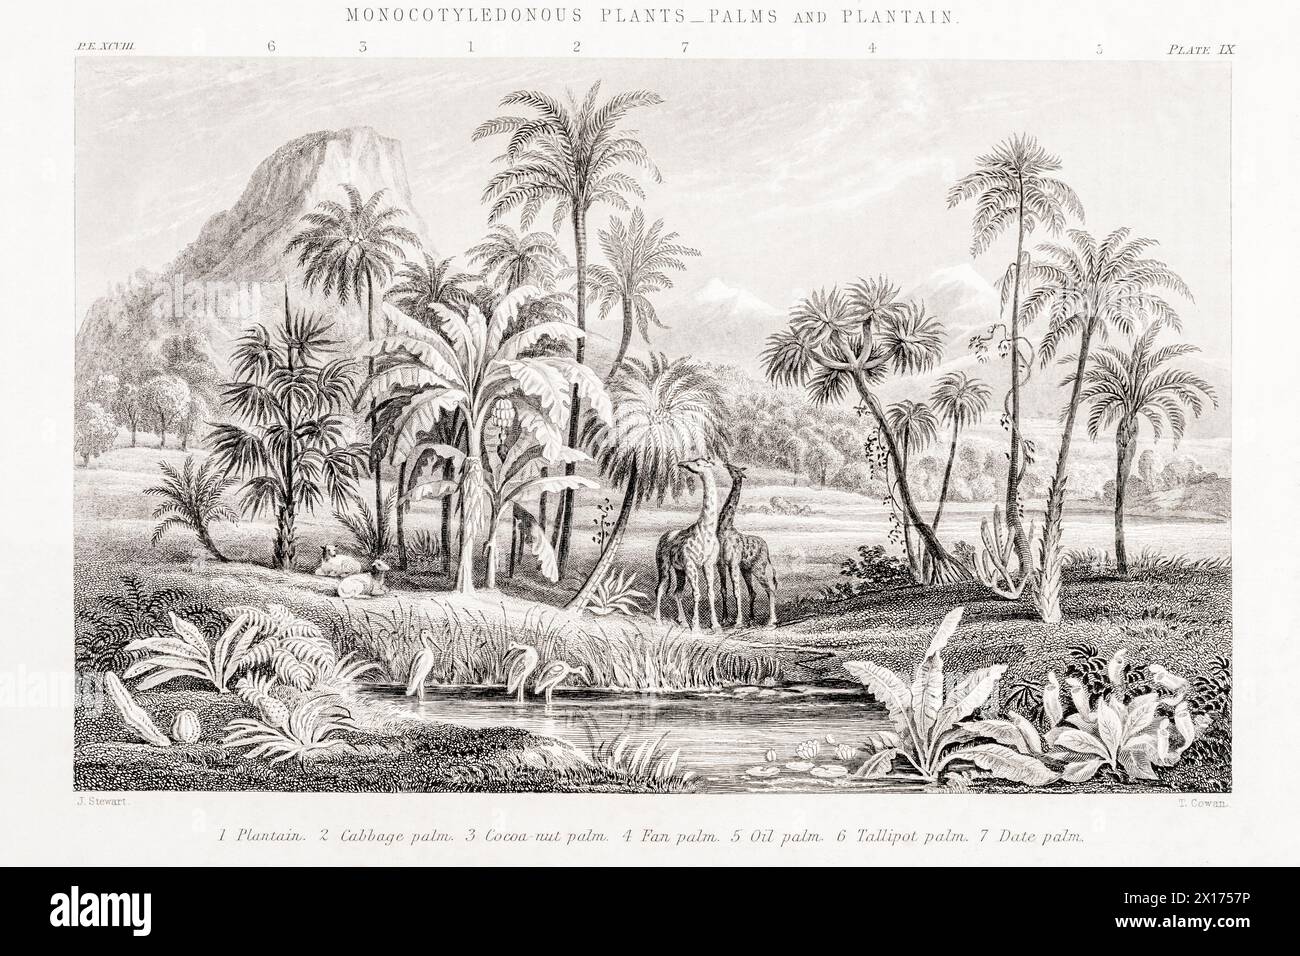 1872 Victorian botanical picture in William Rhind: Monocots - Palms & Plantain. Shows Plantain, Cabbage Palm, Coconut, Fan, Oil and Talipot Palms. Stock Photo